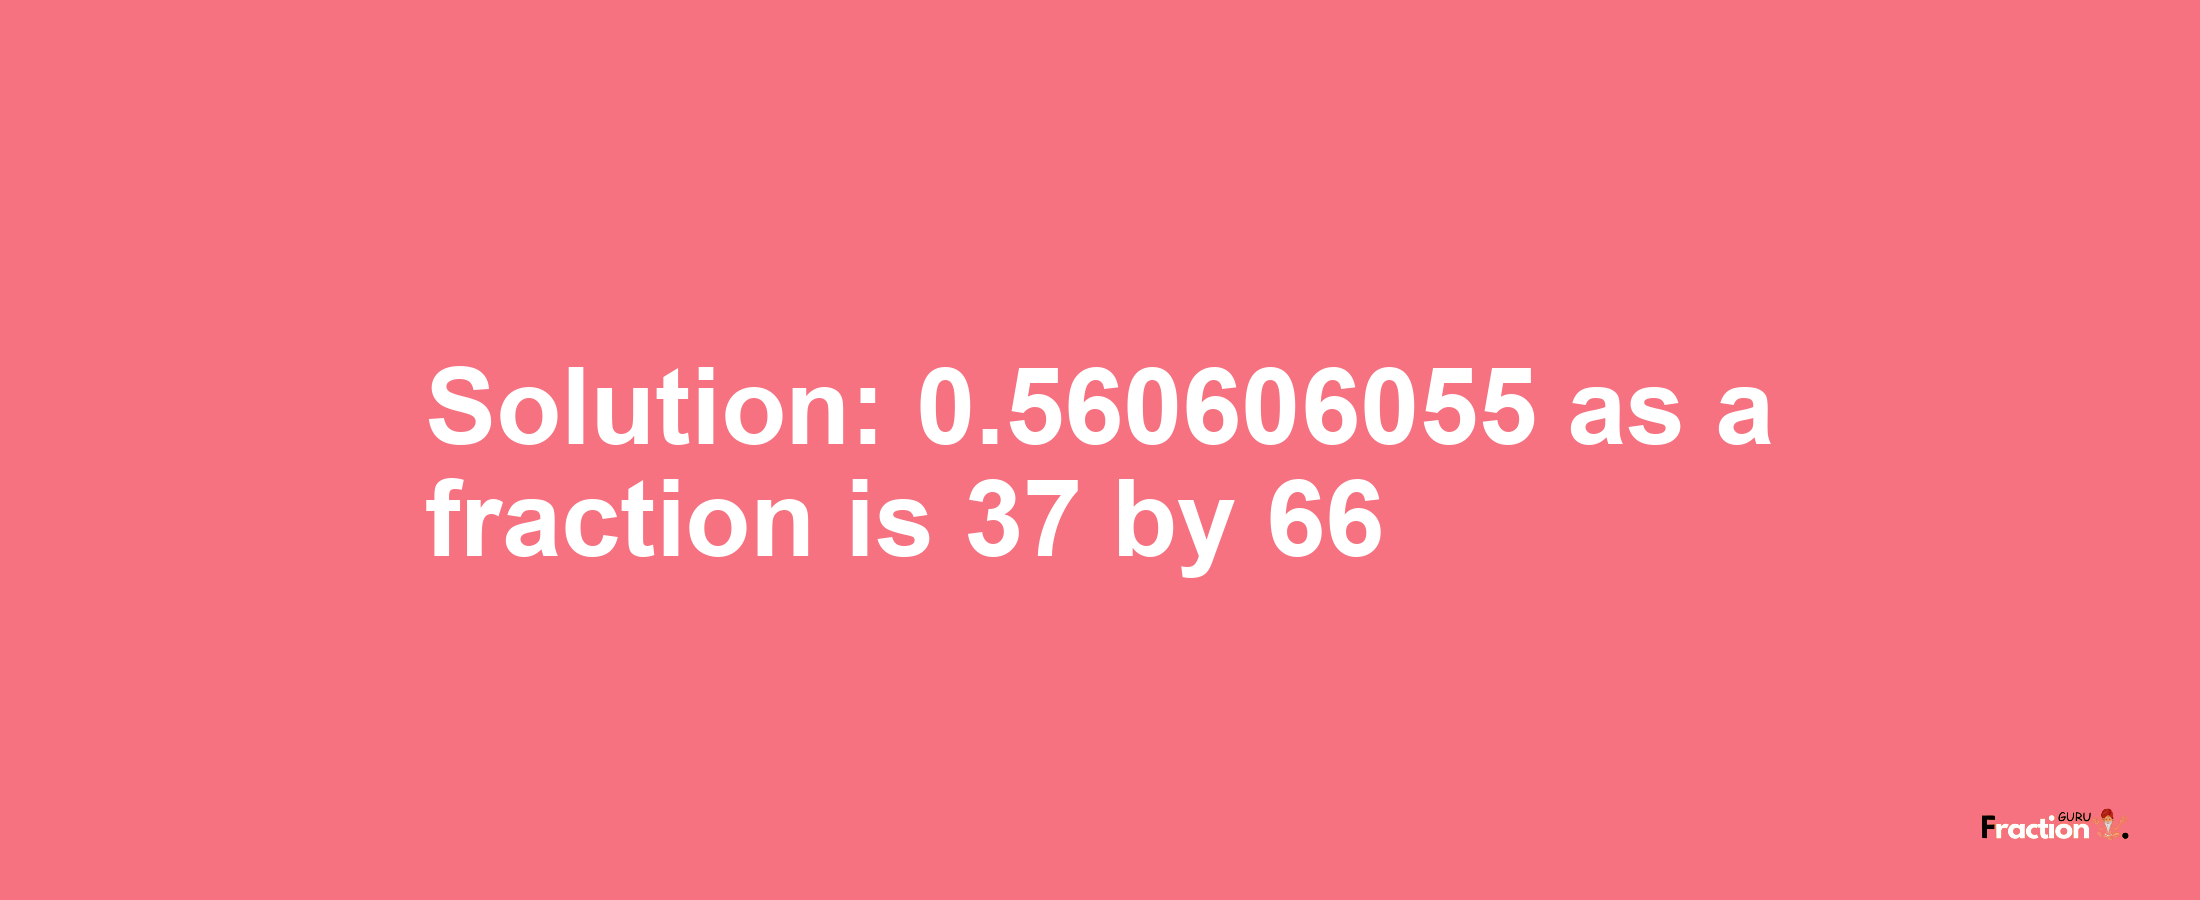 Solution:0.560606055 as a fraction is 37/66